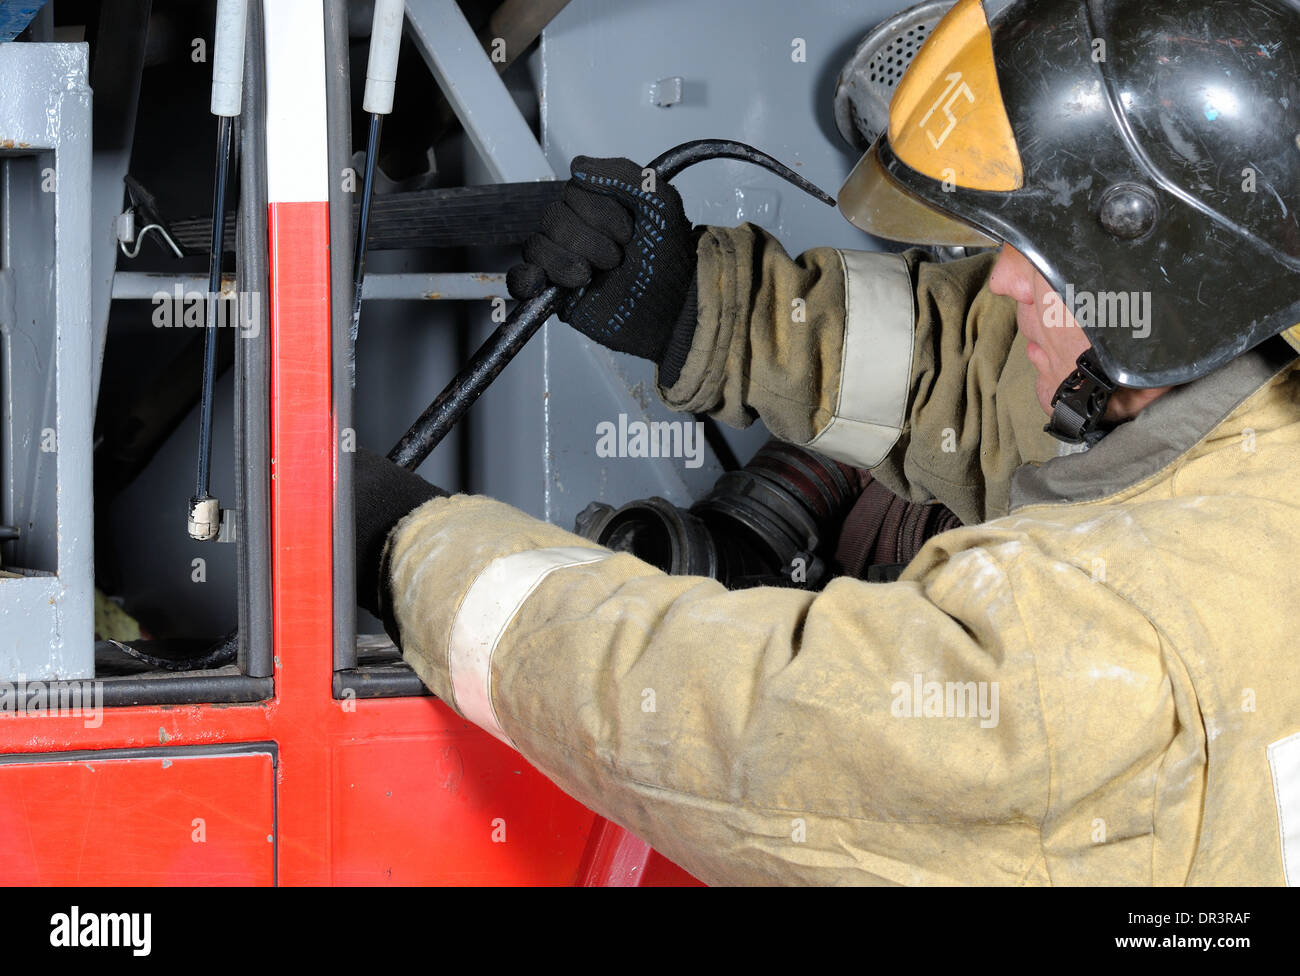 Firefighter pulls the crowbar from the compartment of fire engine Stock Photo